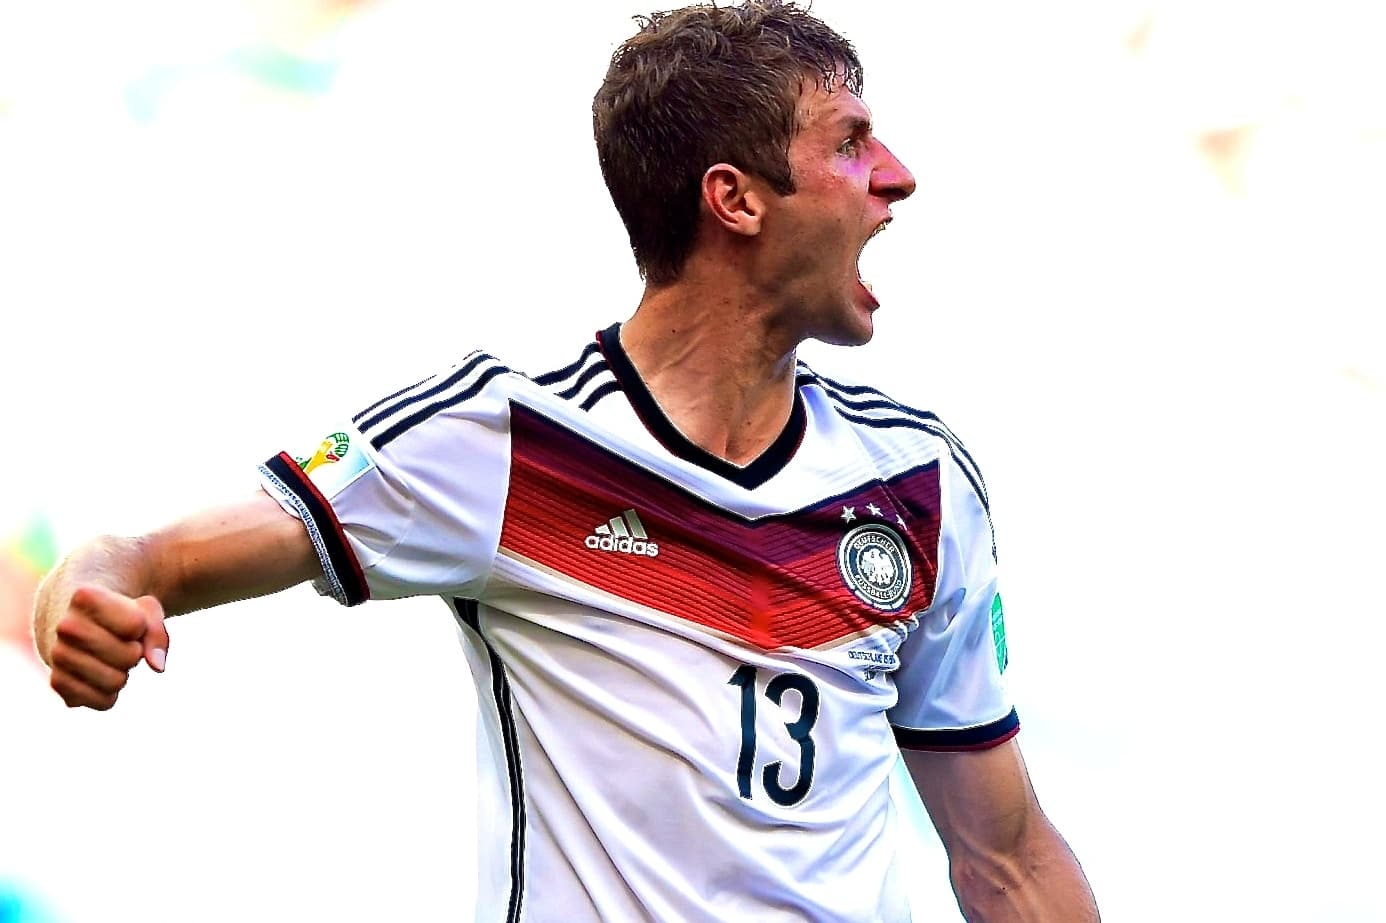 fifa2018 article about thomas muller by Abhijith Premkumar